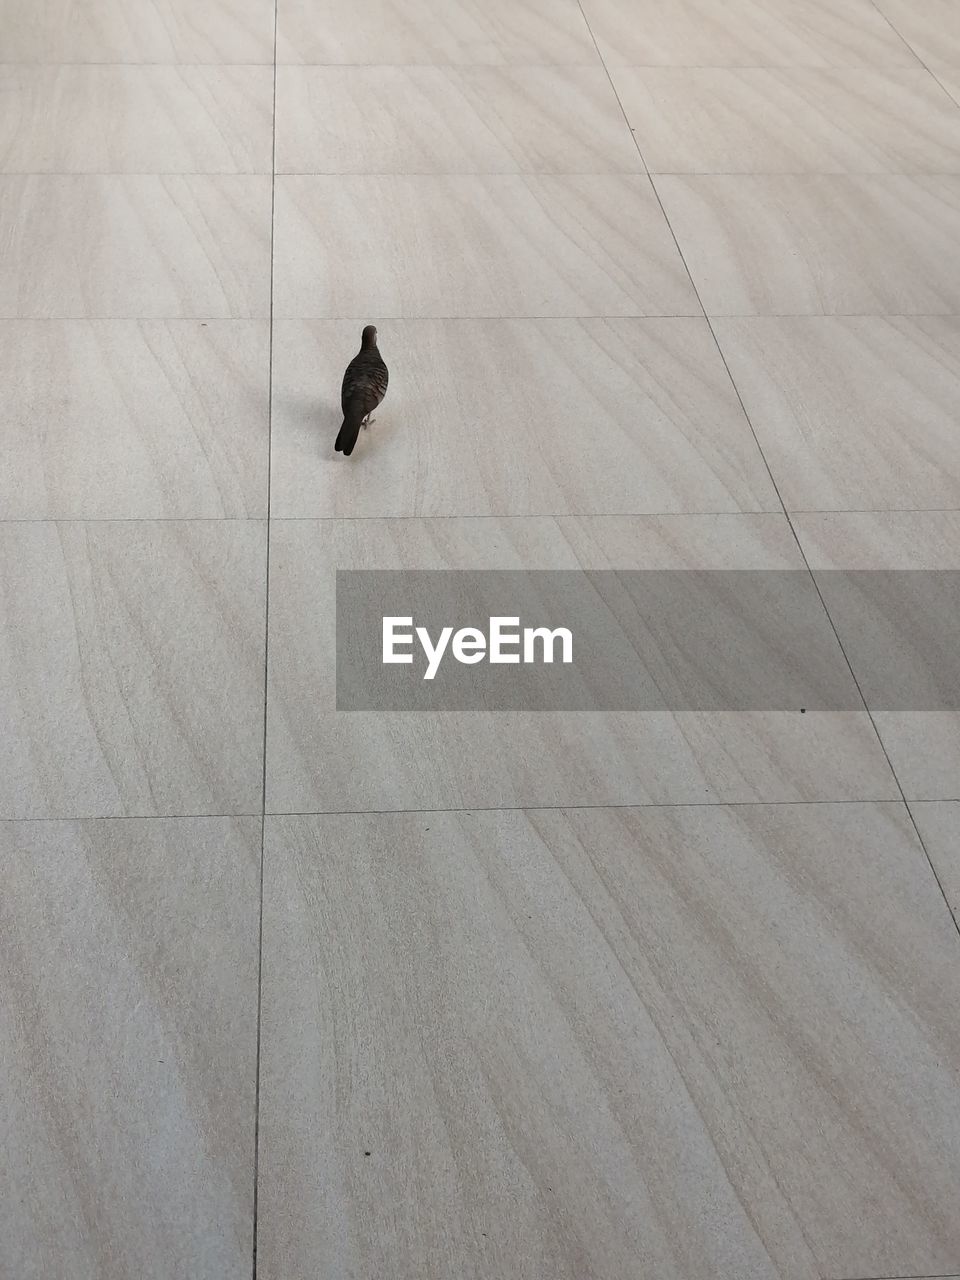 HIGH ANGLE VIEW OF BIRDS WALKING ON FLOOR